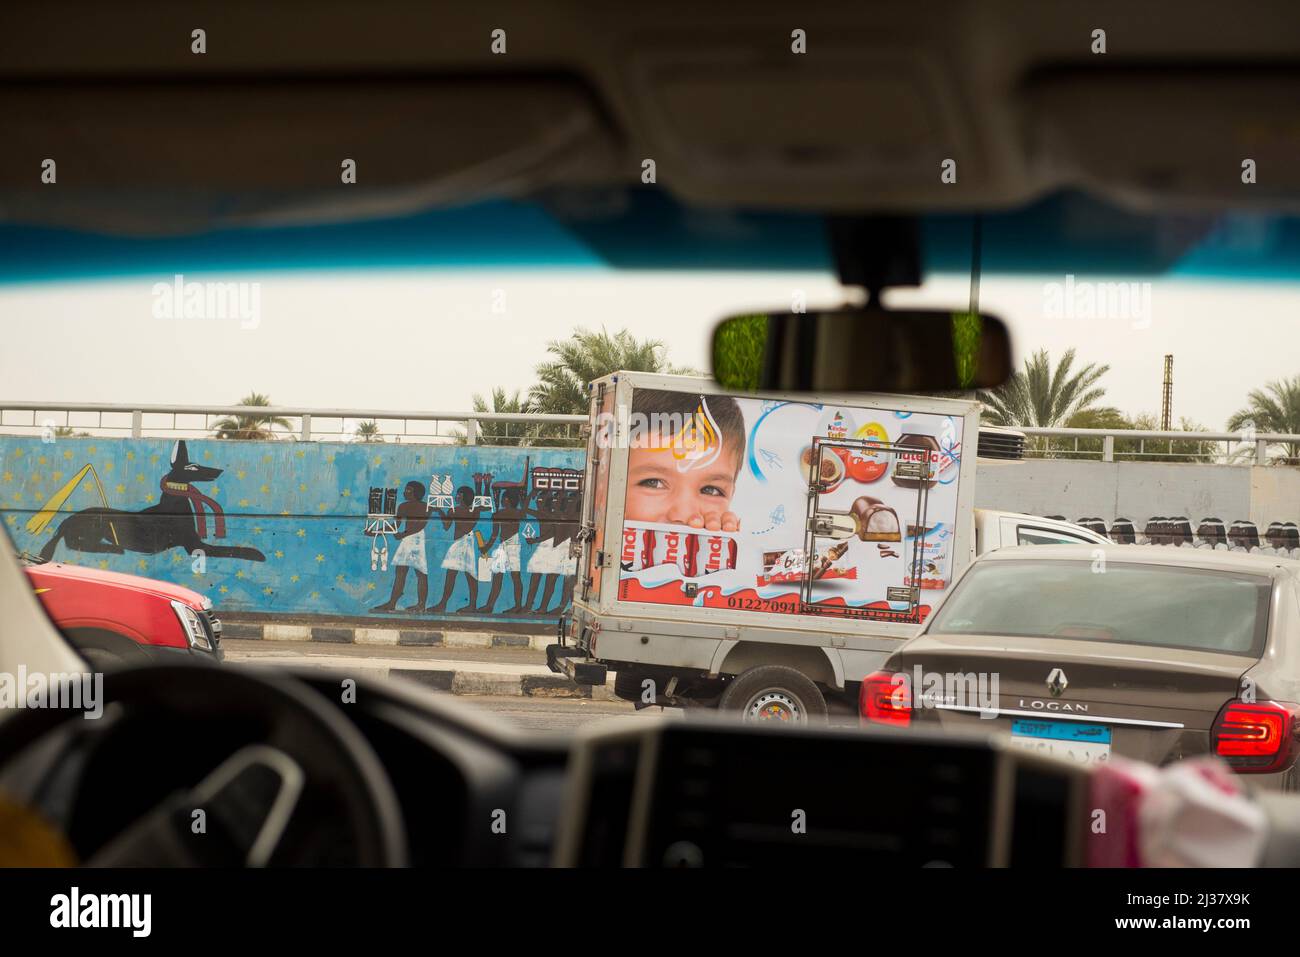 Road traffic seen from inside a car, Luxor, Egypt, Northeast Africa. Stock Photo